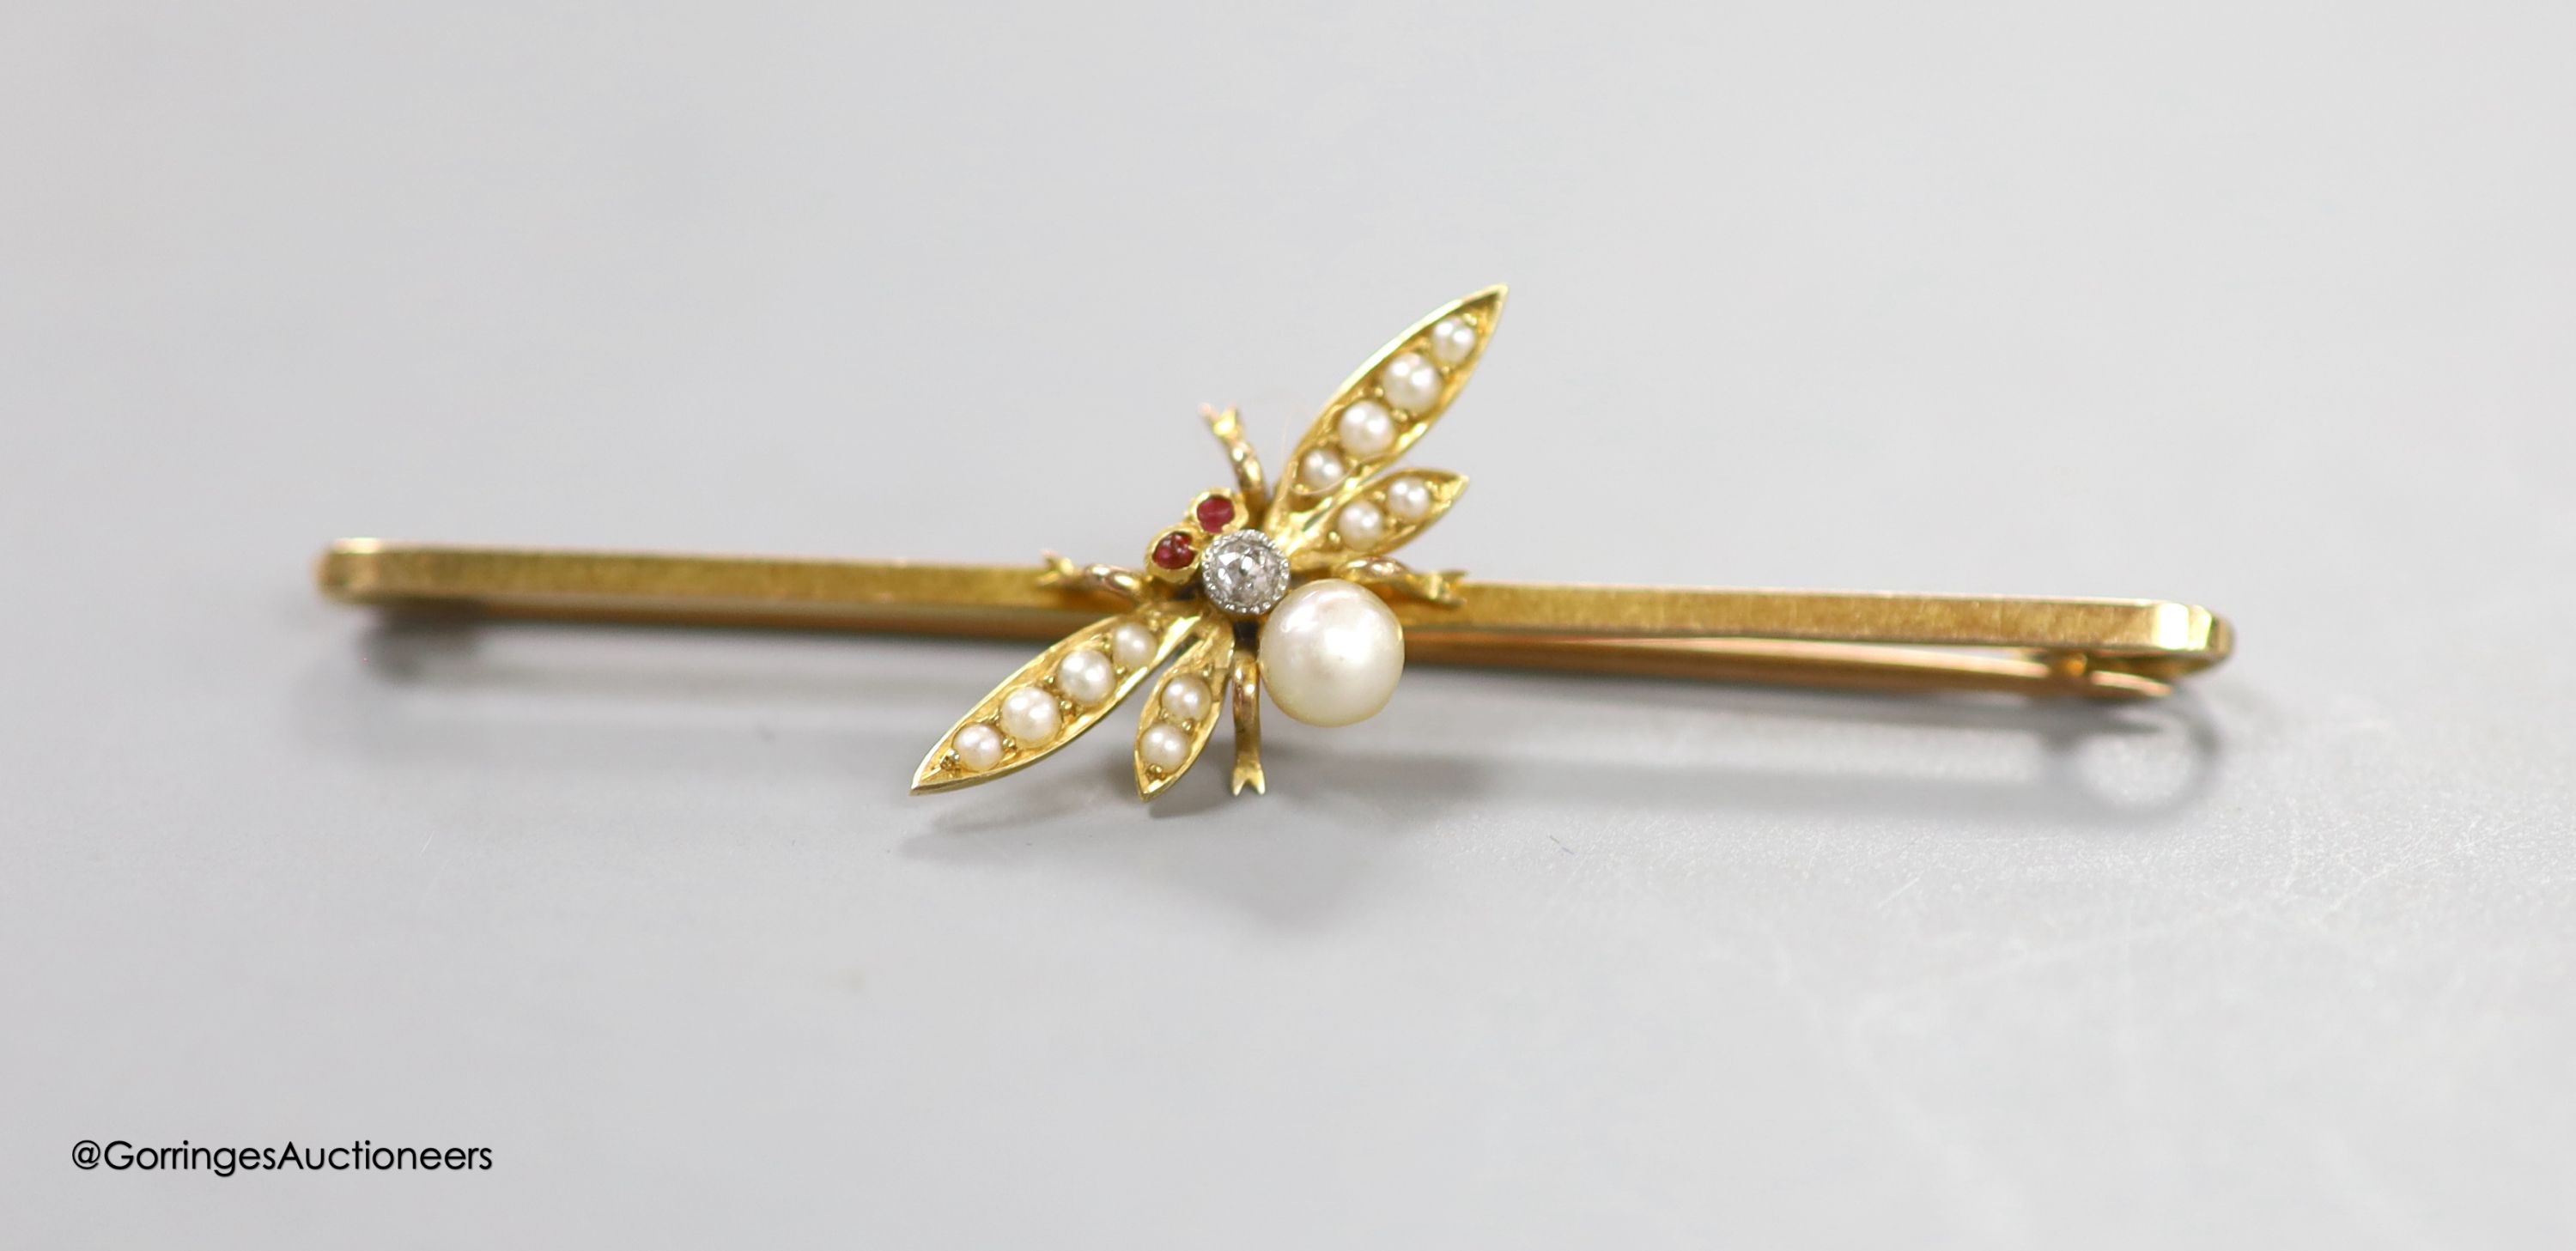 An Edwardian 15ct, diamond and seed pearl set bug bar brooch, with cabochon eyes, 53mm, gross 3.3. grams.